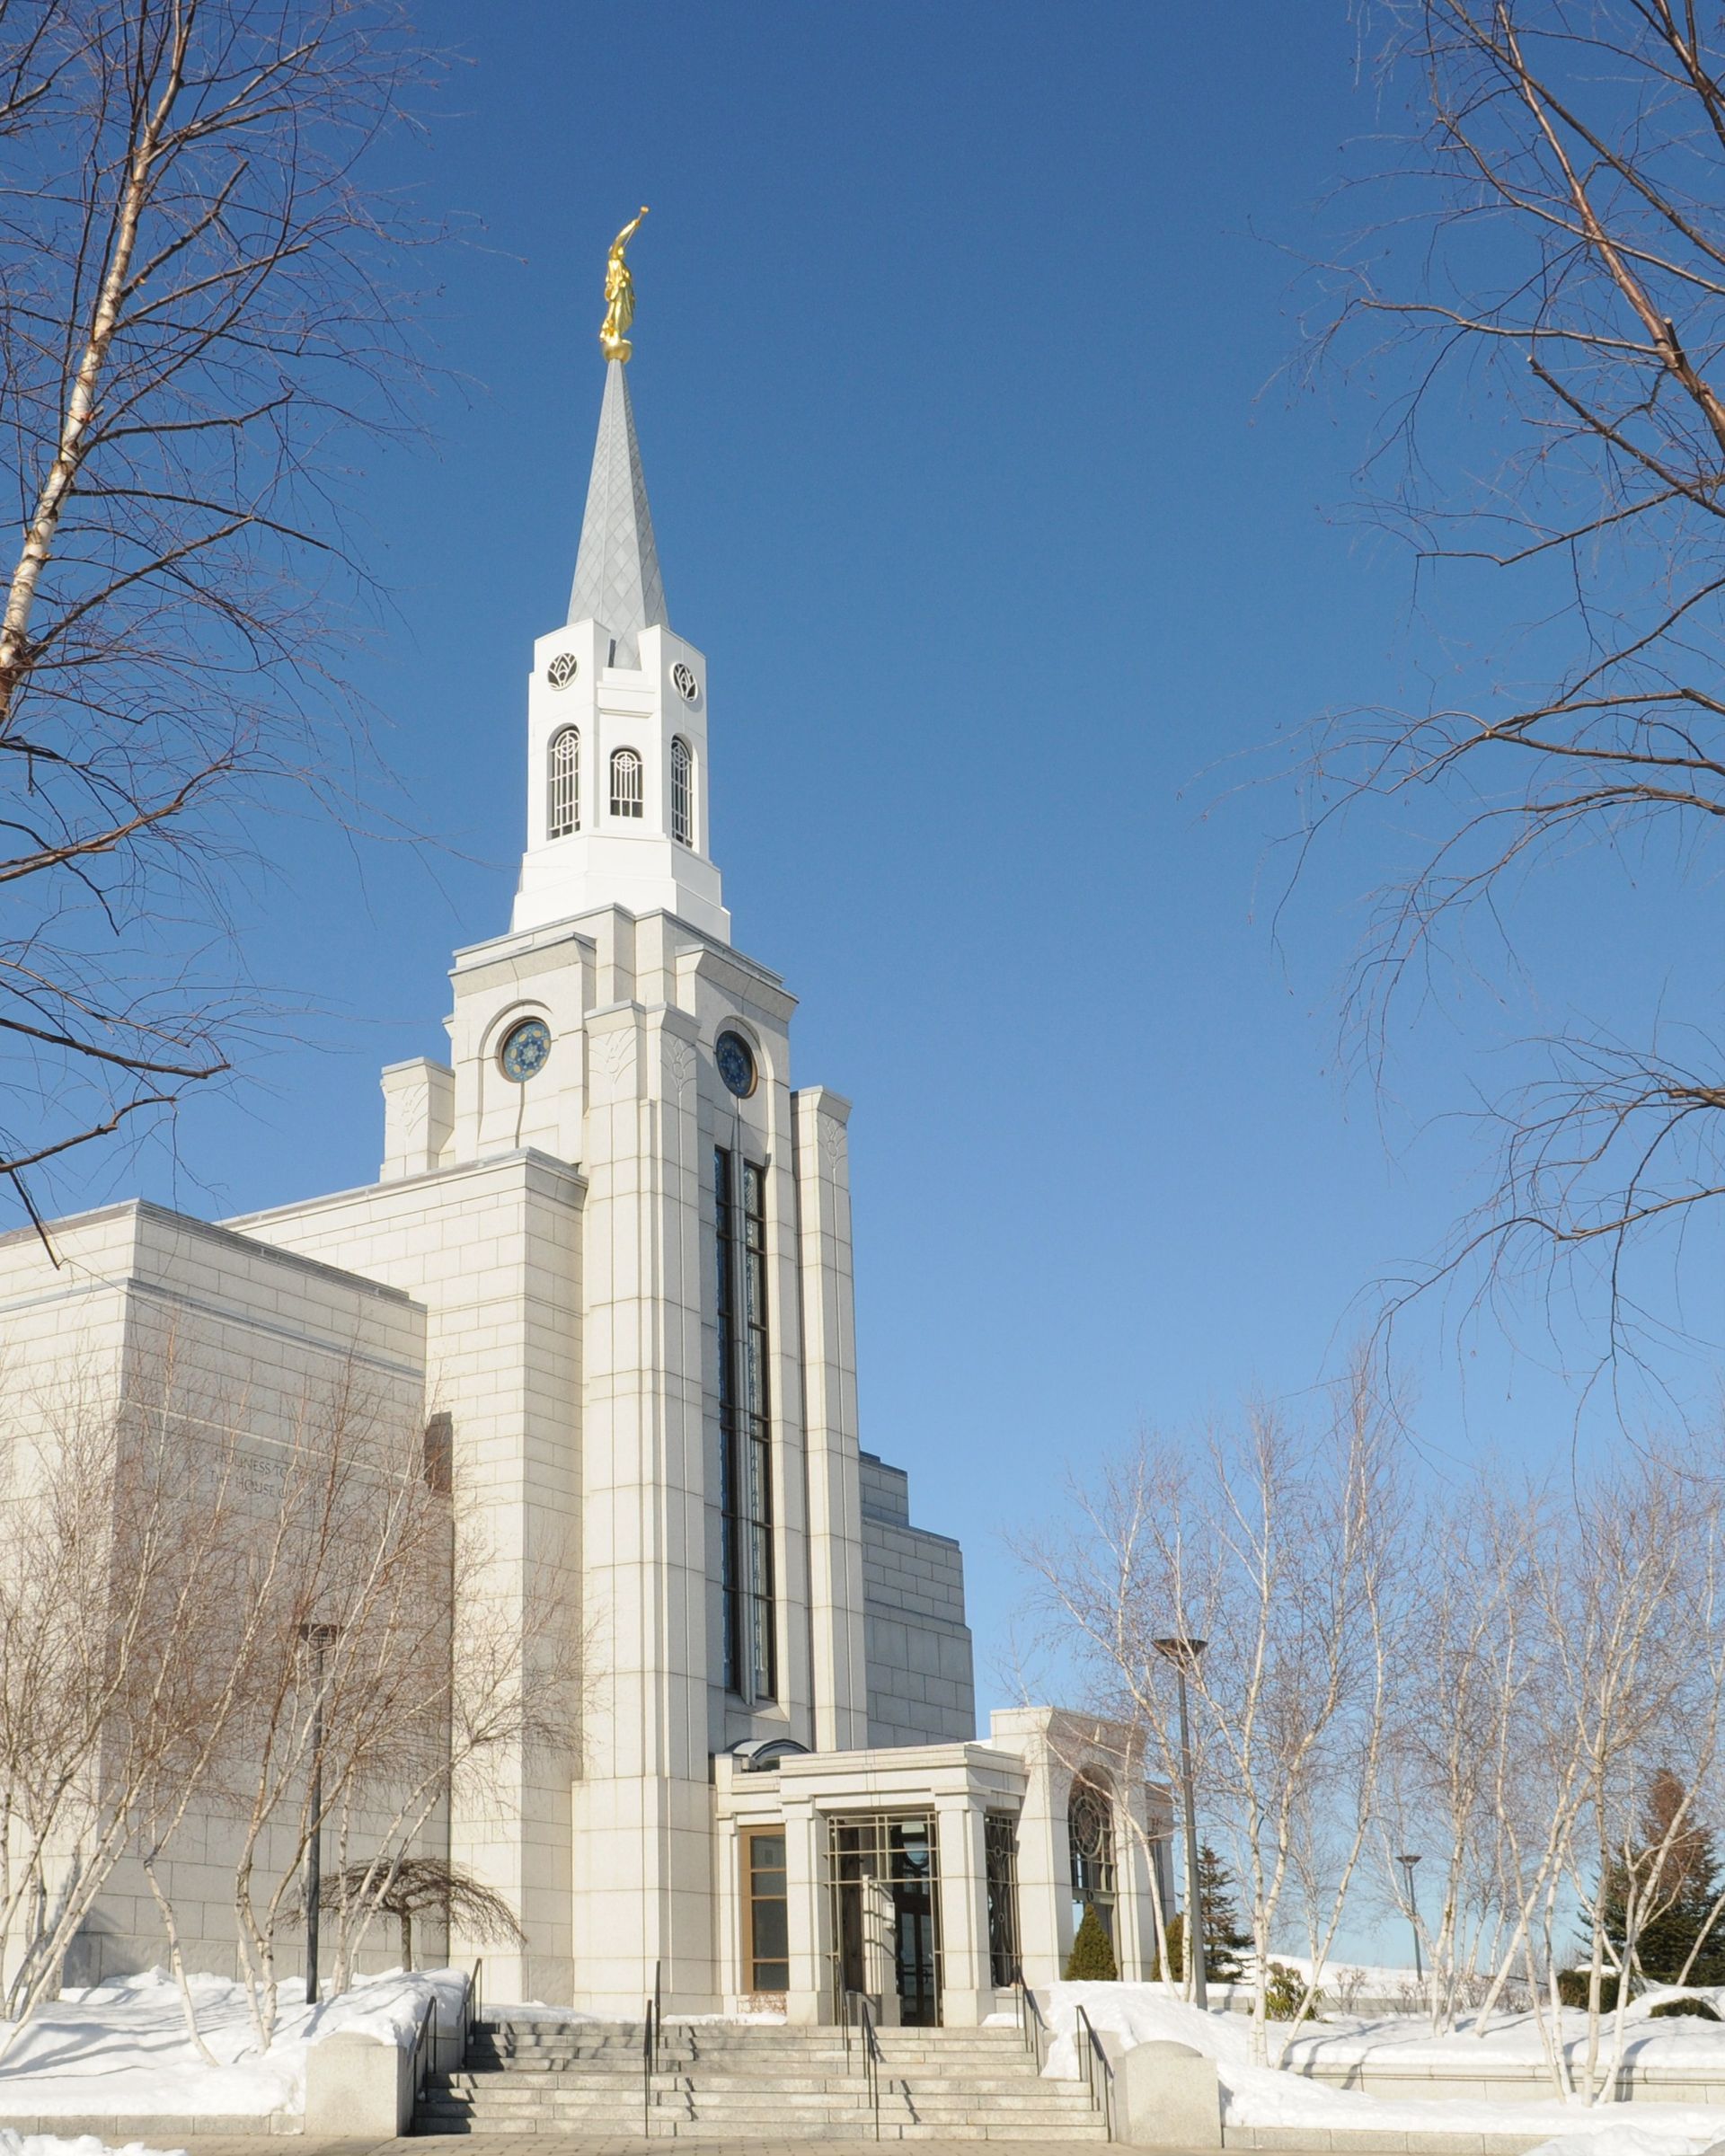 A view of the spire of the Boston Massachusetts Temple during the winter.